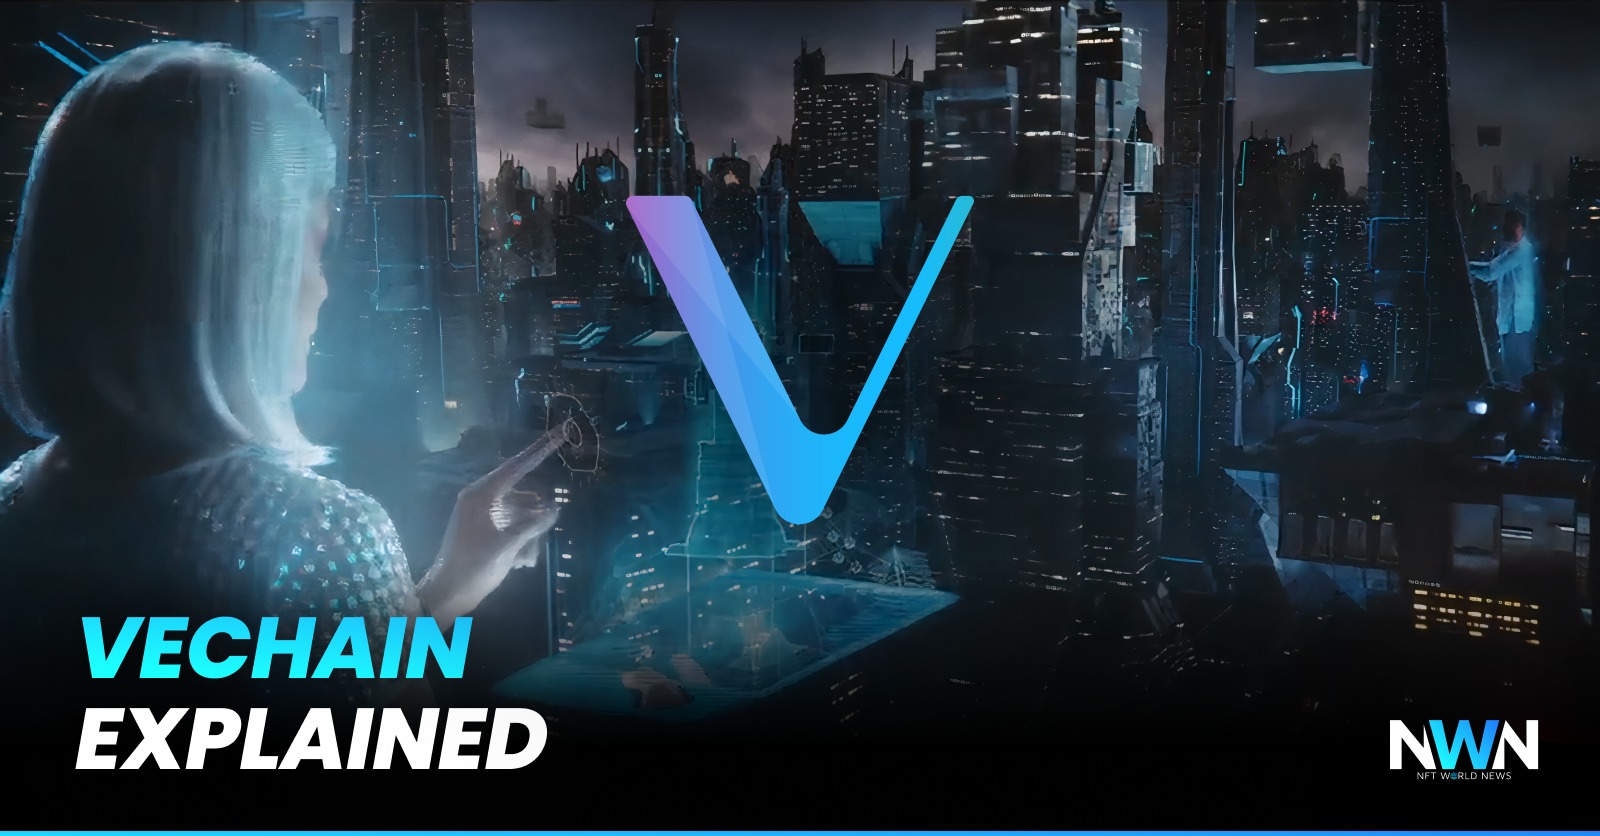 VeChain - The Combination of Governance and IoT Technologies